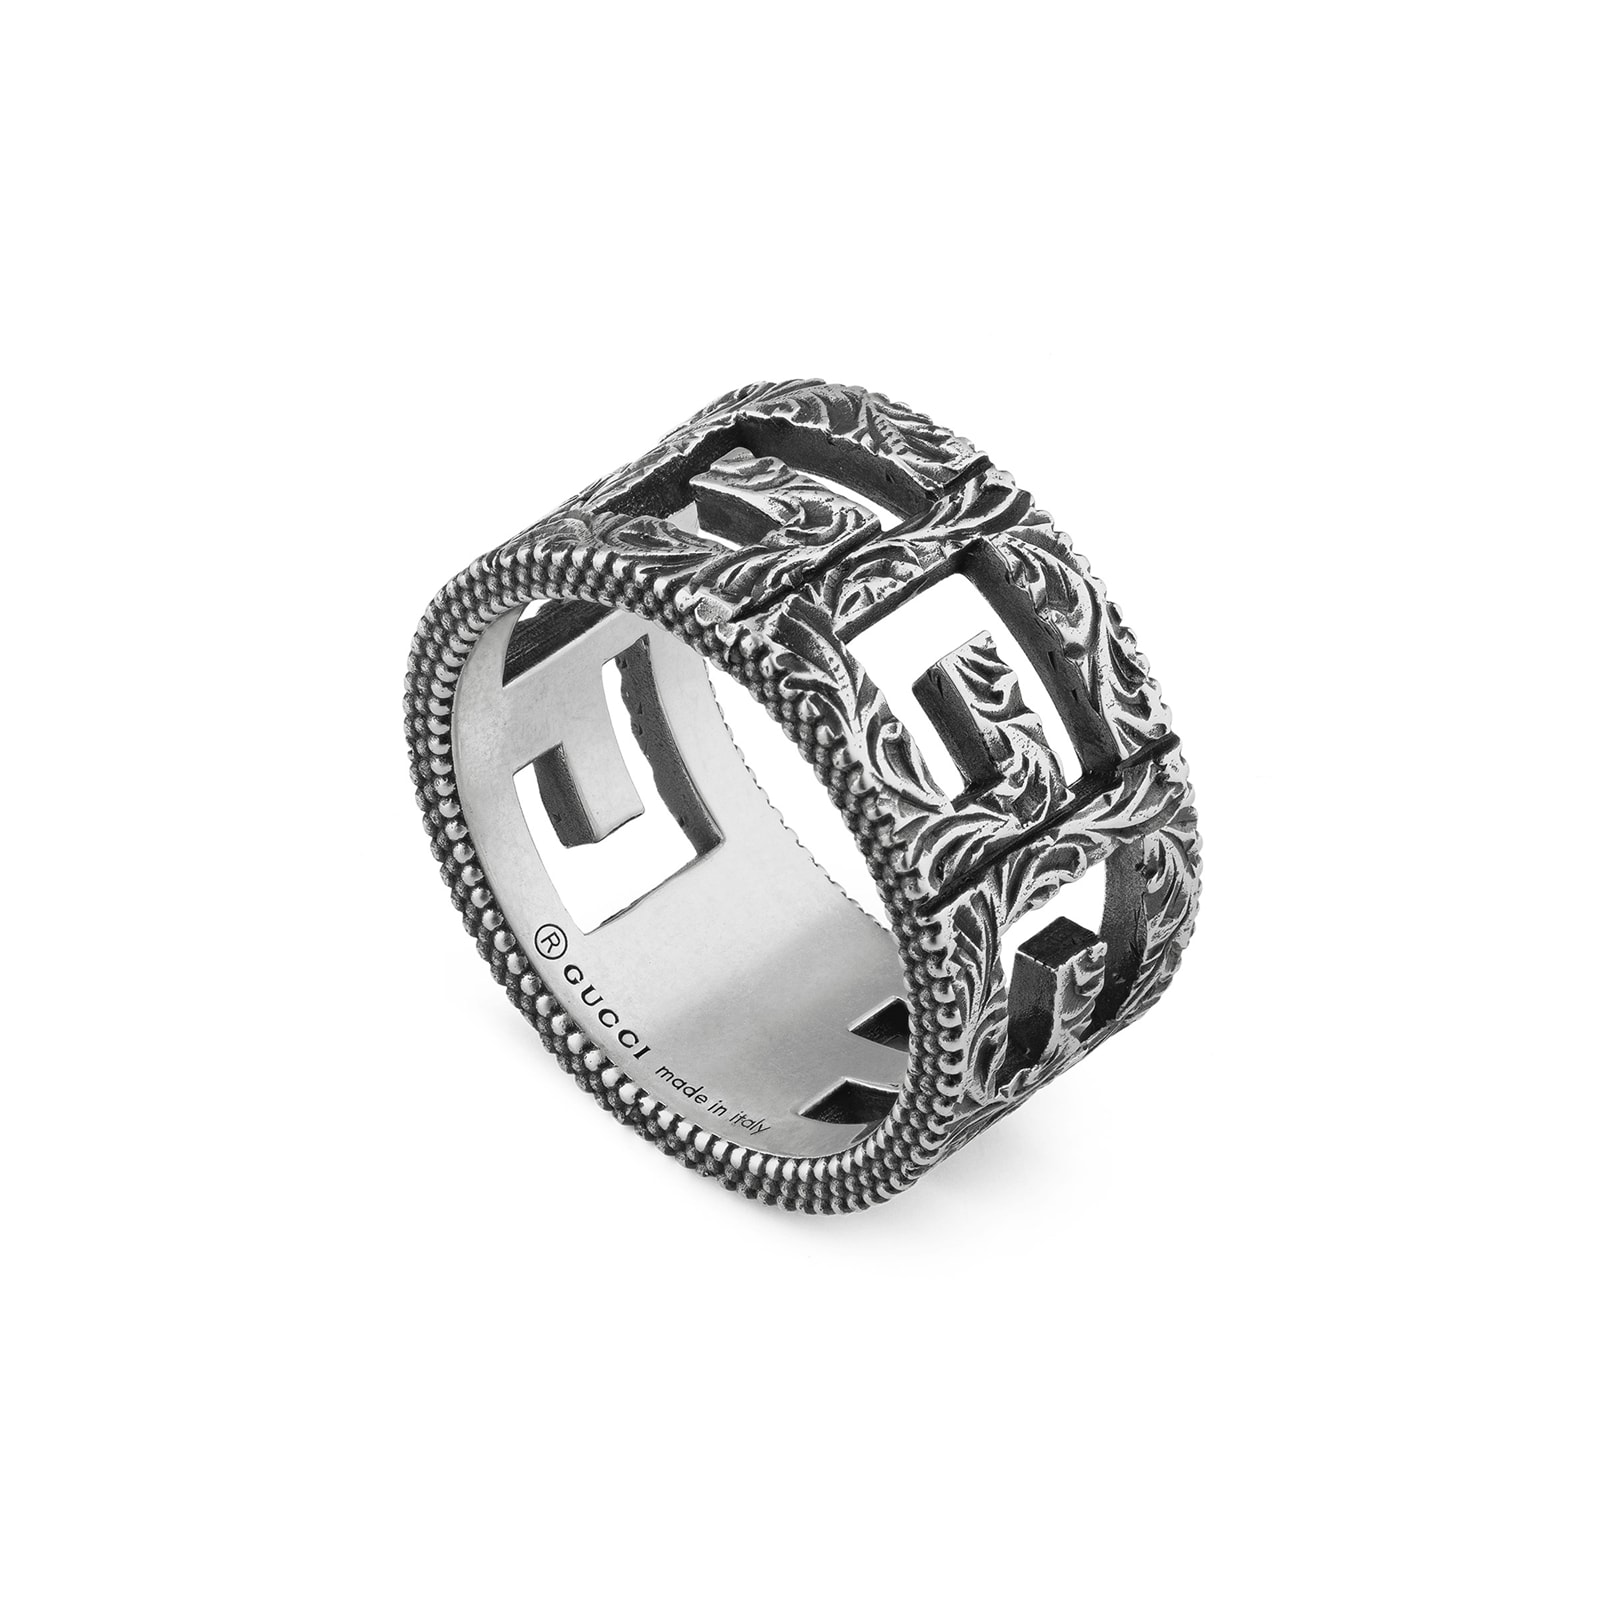 Ring With Square G Motif In Silver - Ring Size M